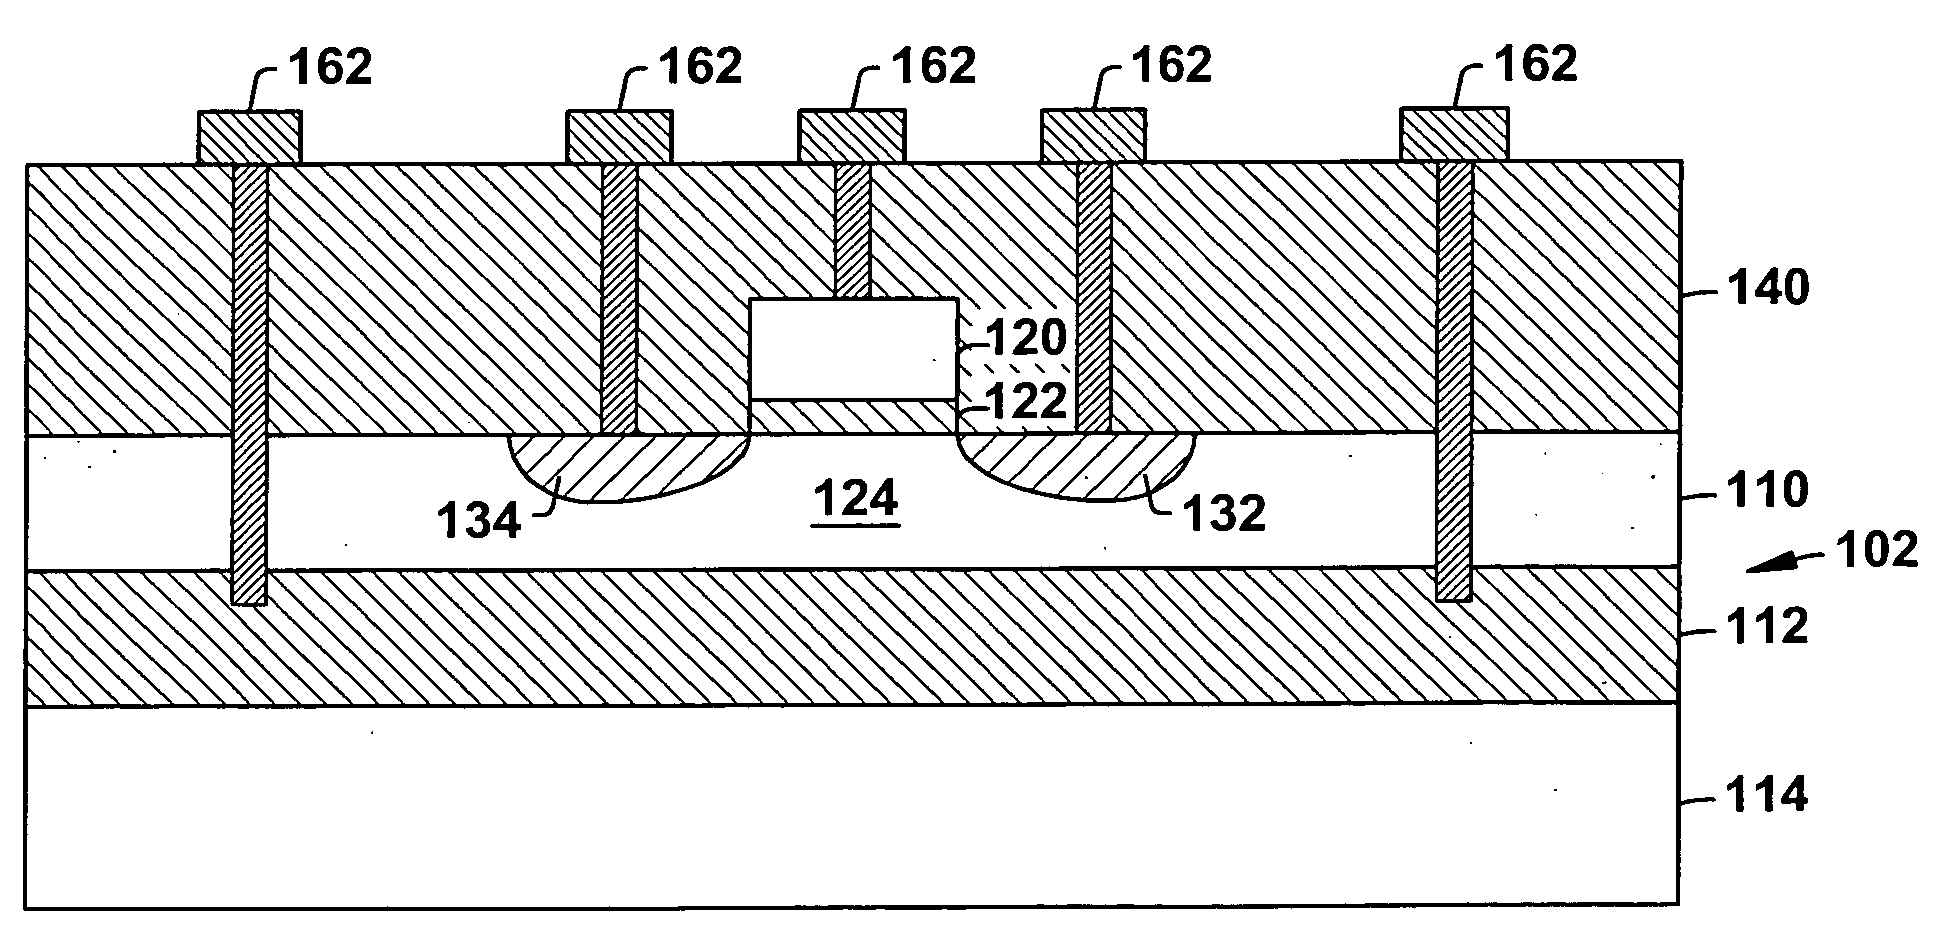 Wafer bonded MOS decoupling capacitor